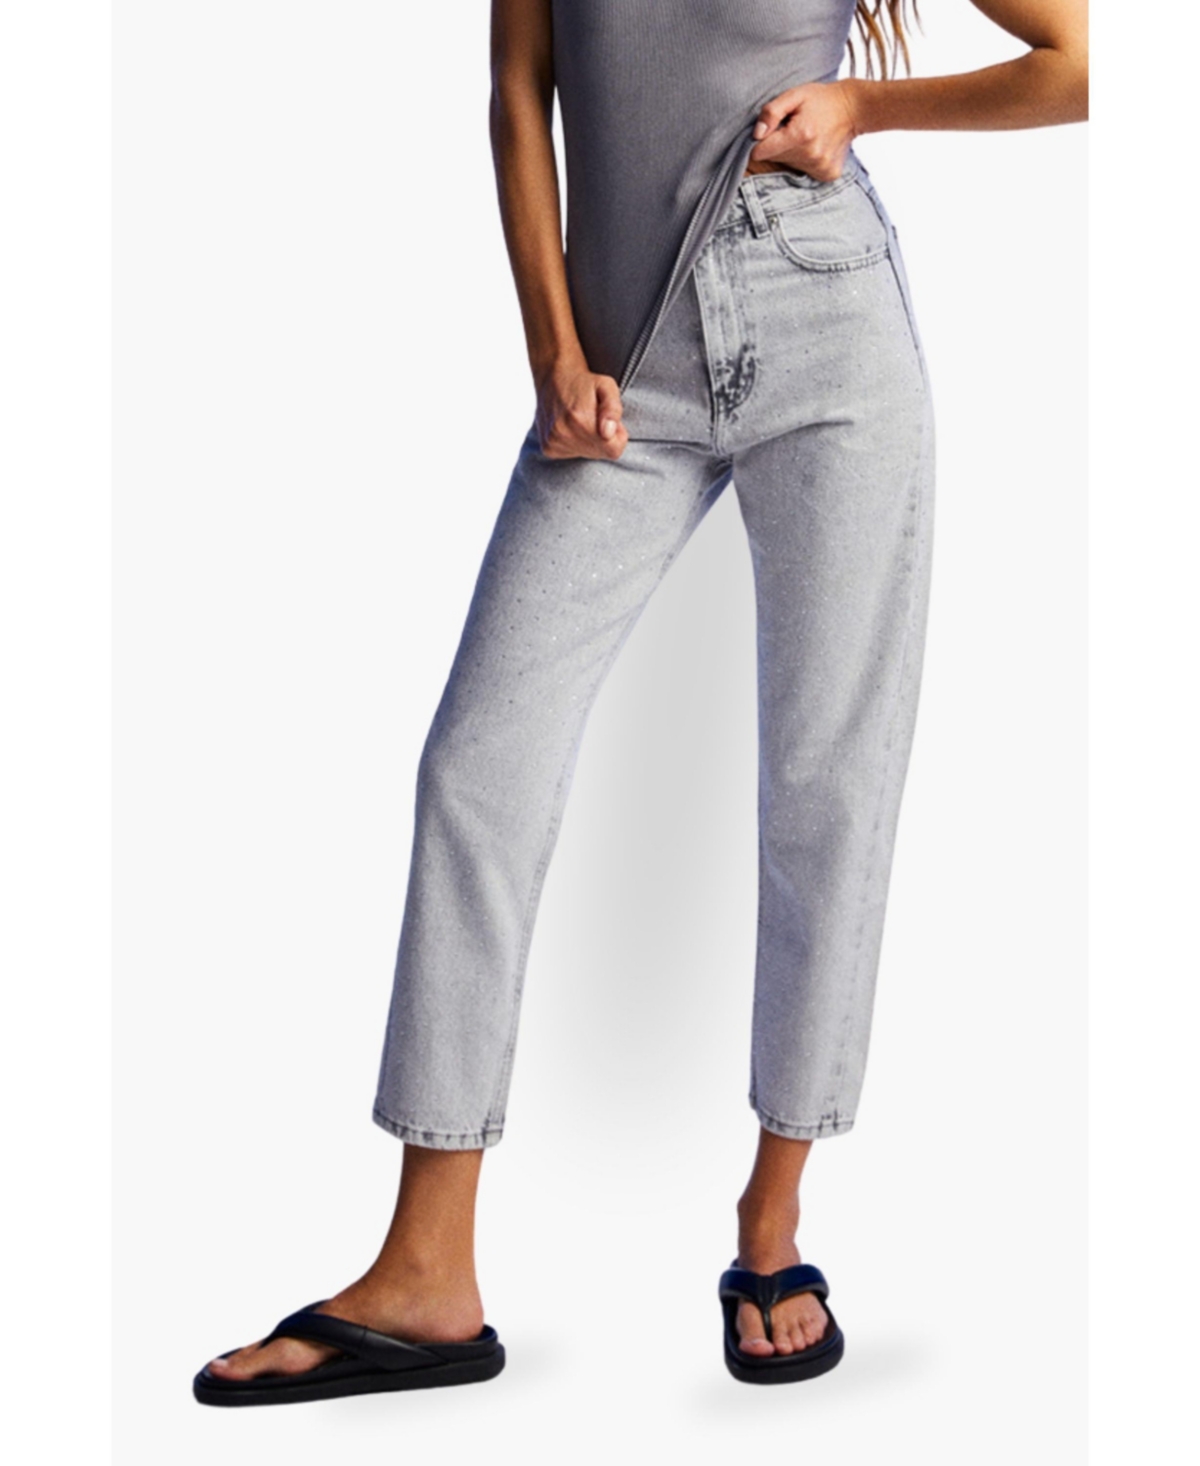 Women's High-Waisted Jeans - Grey